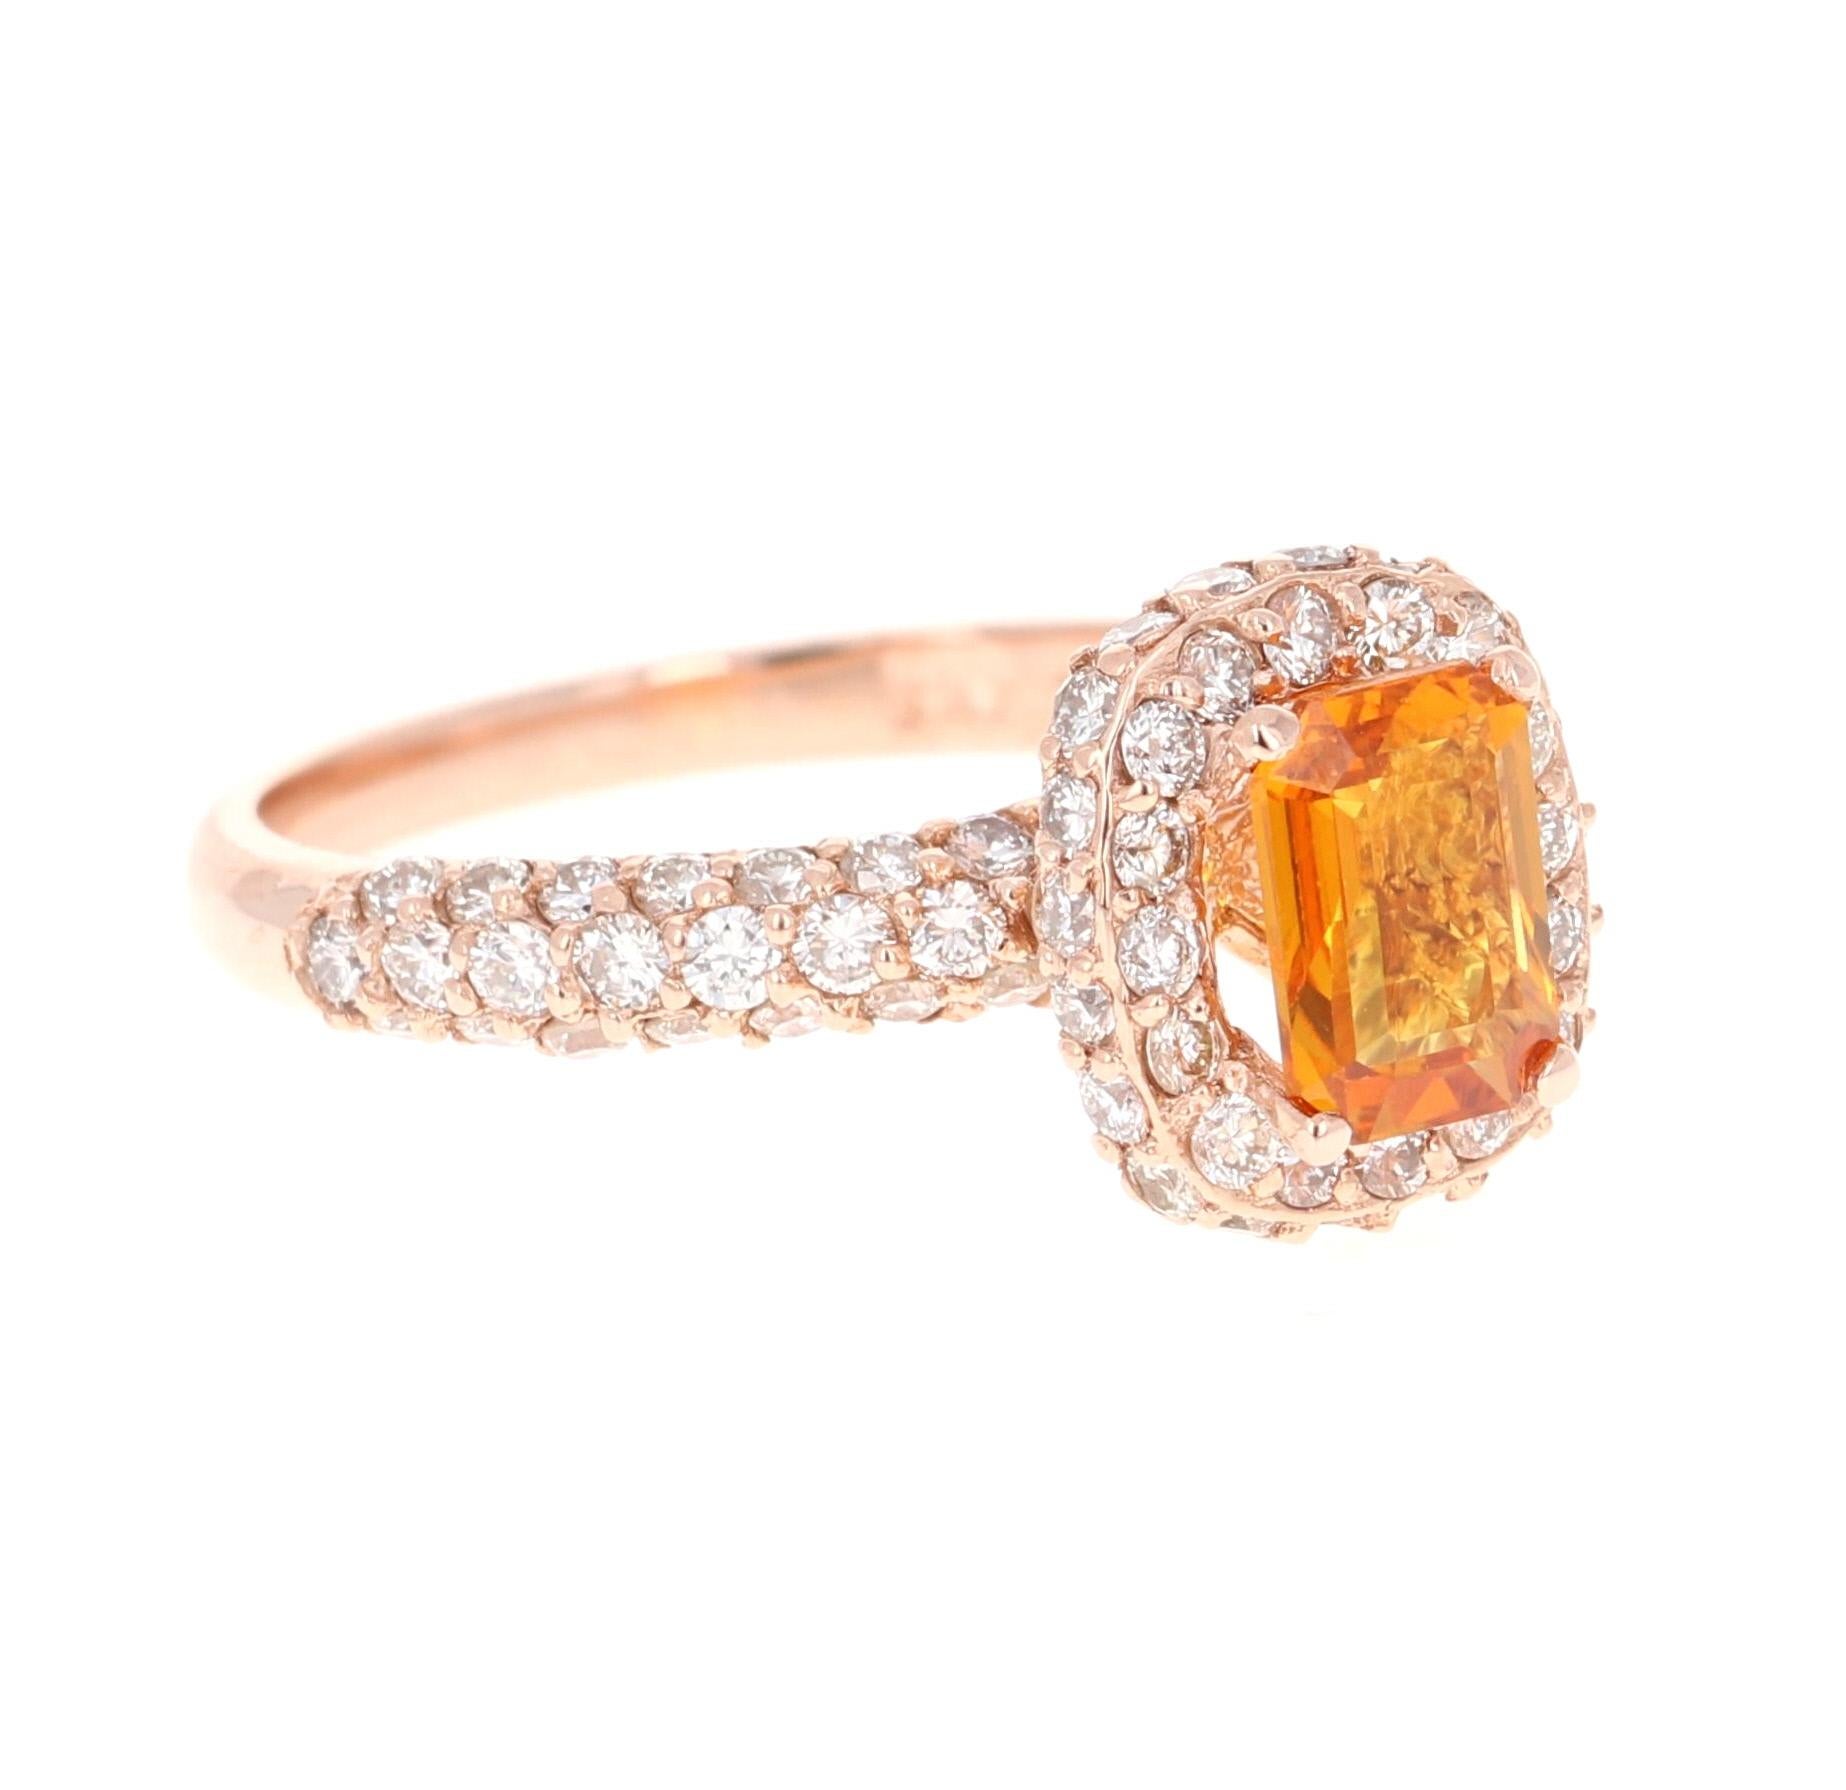 This beautiful ring has Natural Emerald Cut Orange Sapphire that weighs 1.03 Carats and is surrounded 64 Round Cut Diamonds that weigh 0.89 Carats. The total carat weight of the ring is 1.92 Carats. 

The ring is beautifully set in a classic 14